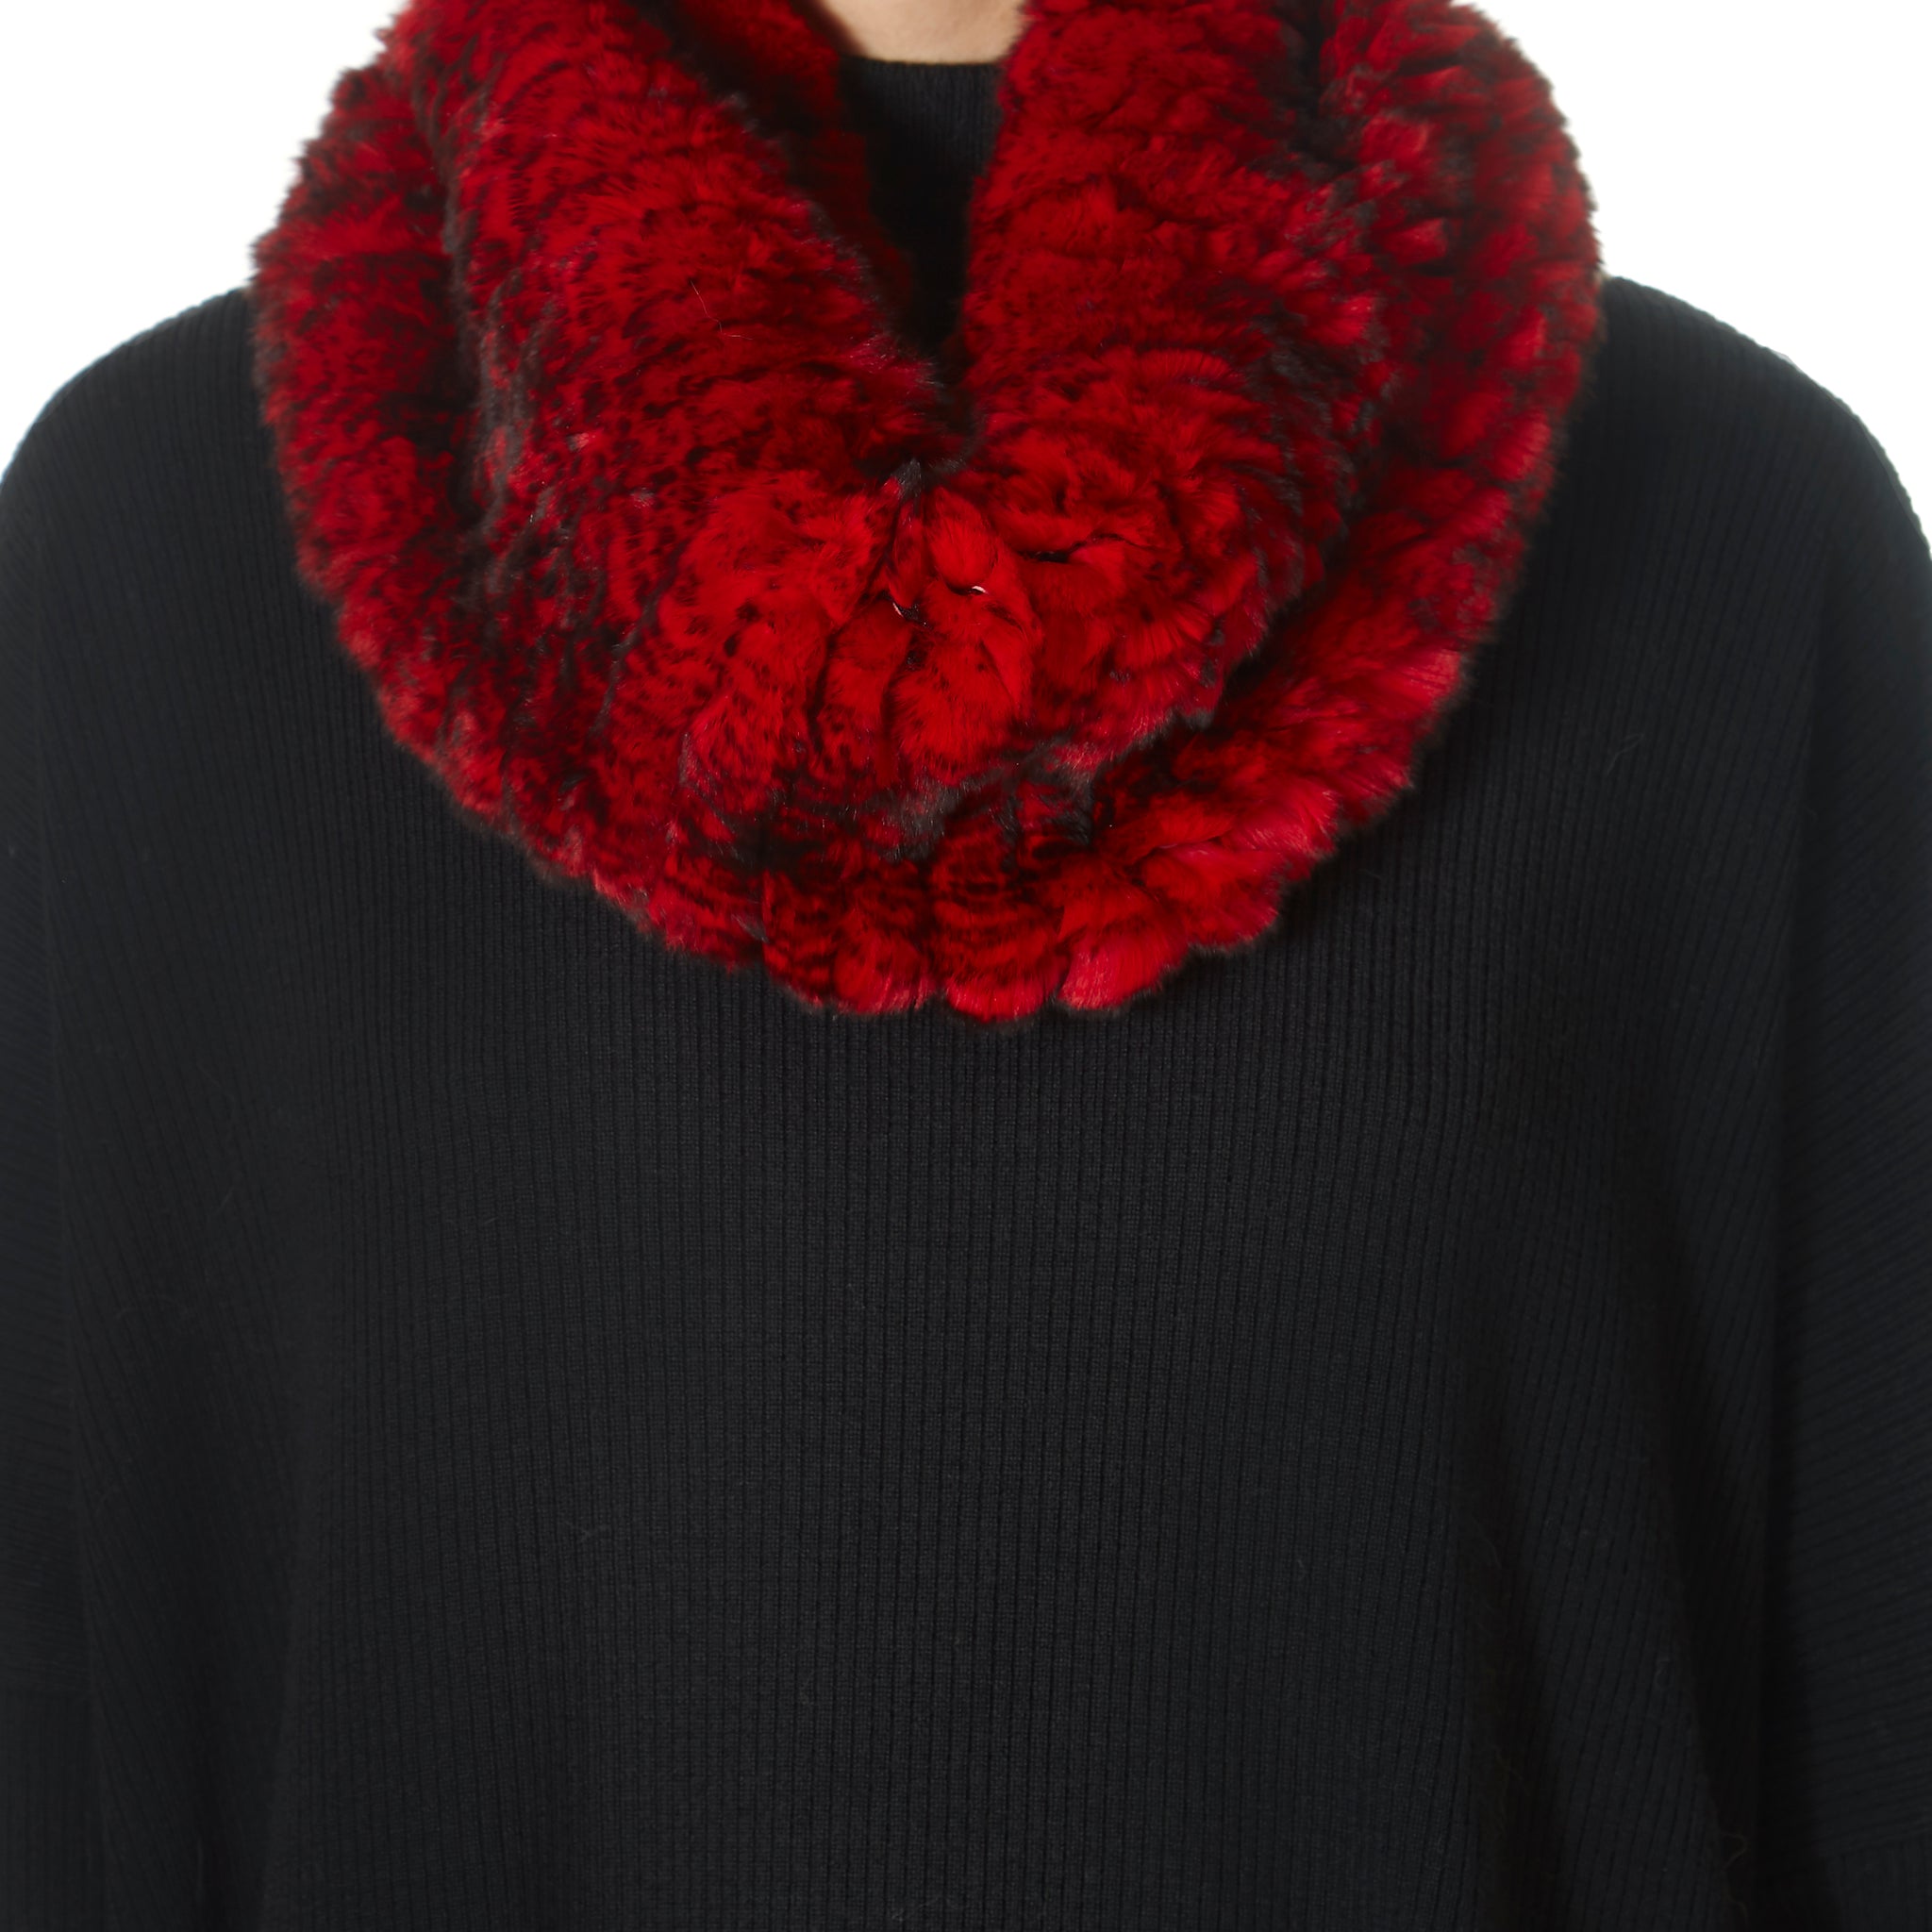 Red Snowtop Knitted Rabbit Single Snood Scarf - Jessimara